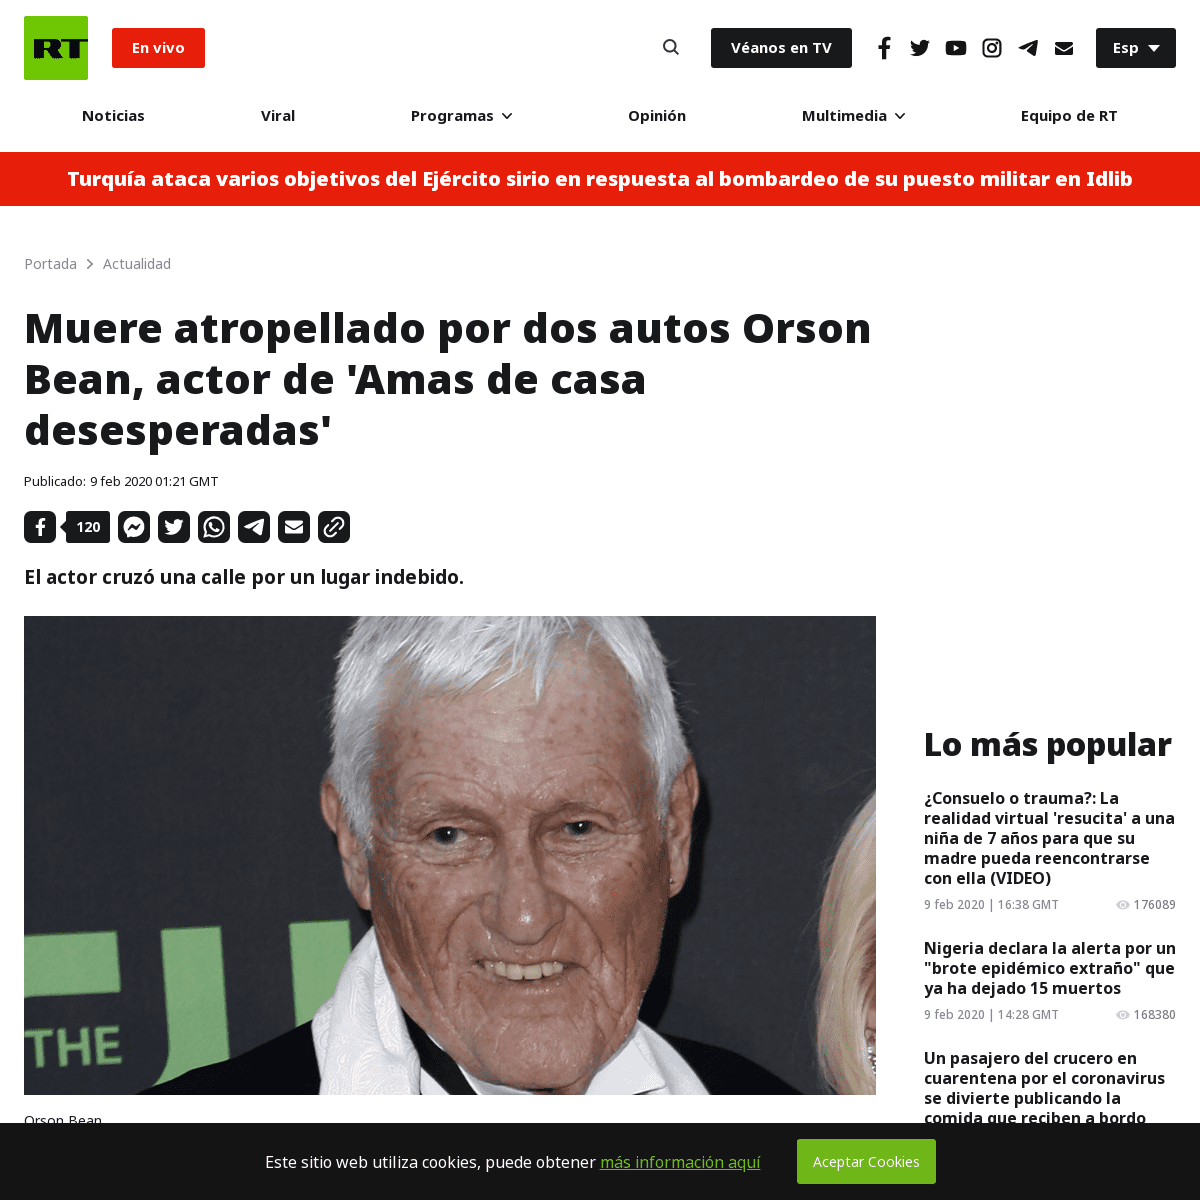 A complete backup of actualidad.rt.com/actualidad/342519-muere-actor-orson-bean